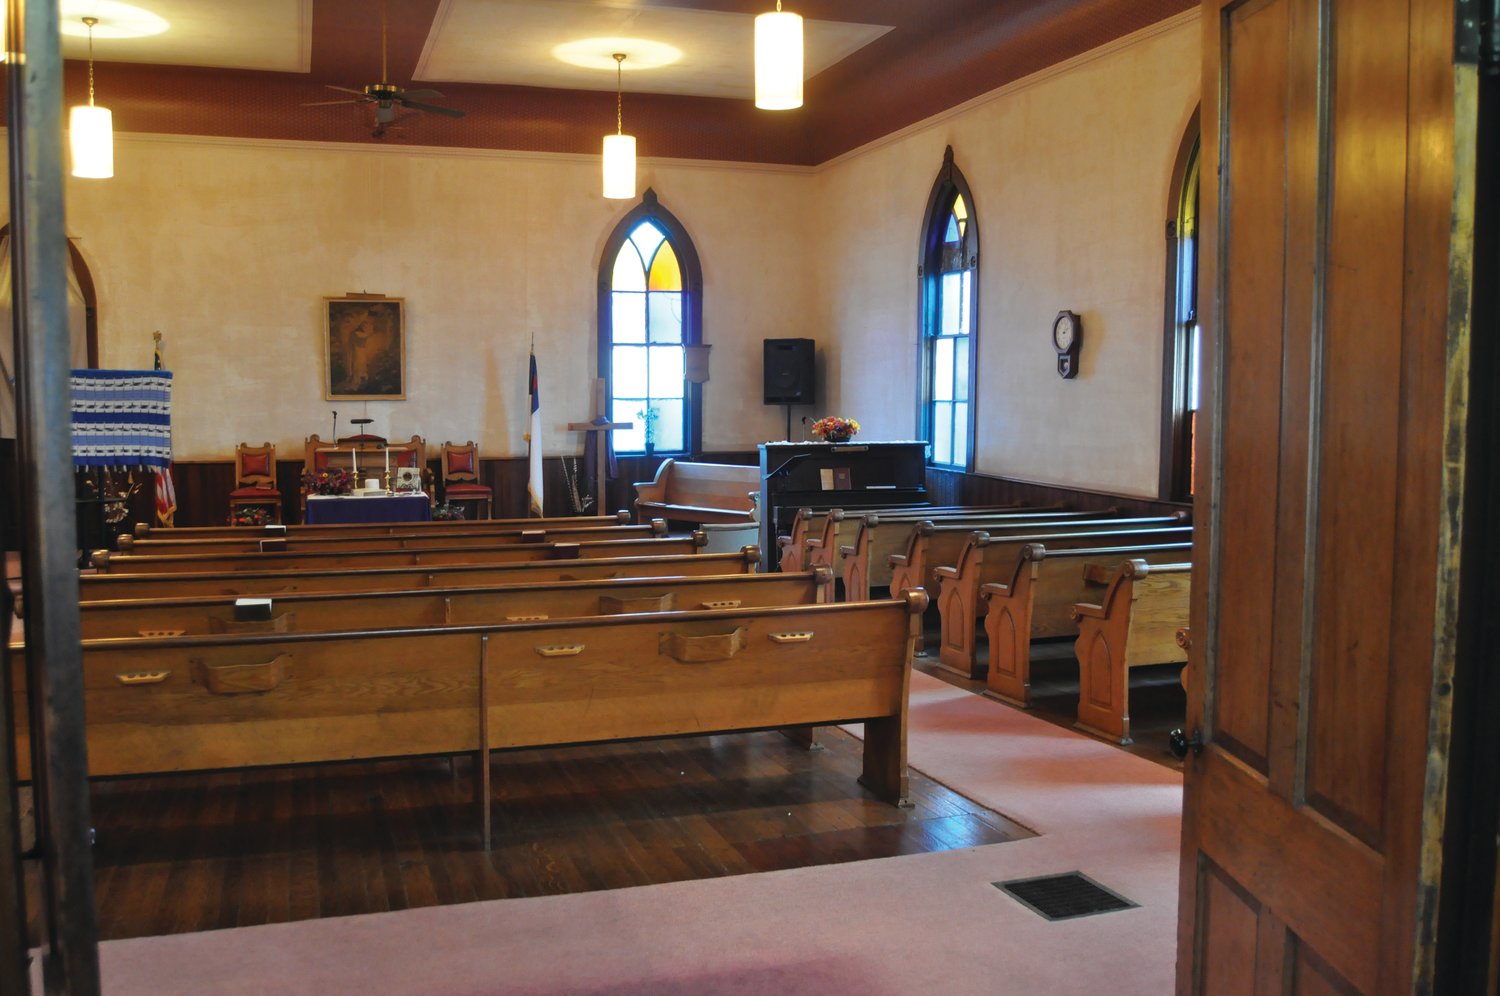 The sanctuary of Osborn Prairie Christian Church, now home to the congregation of Church of God's Love.